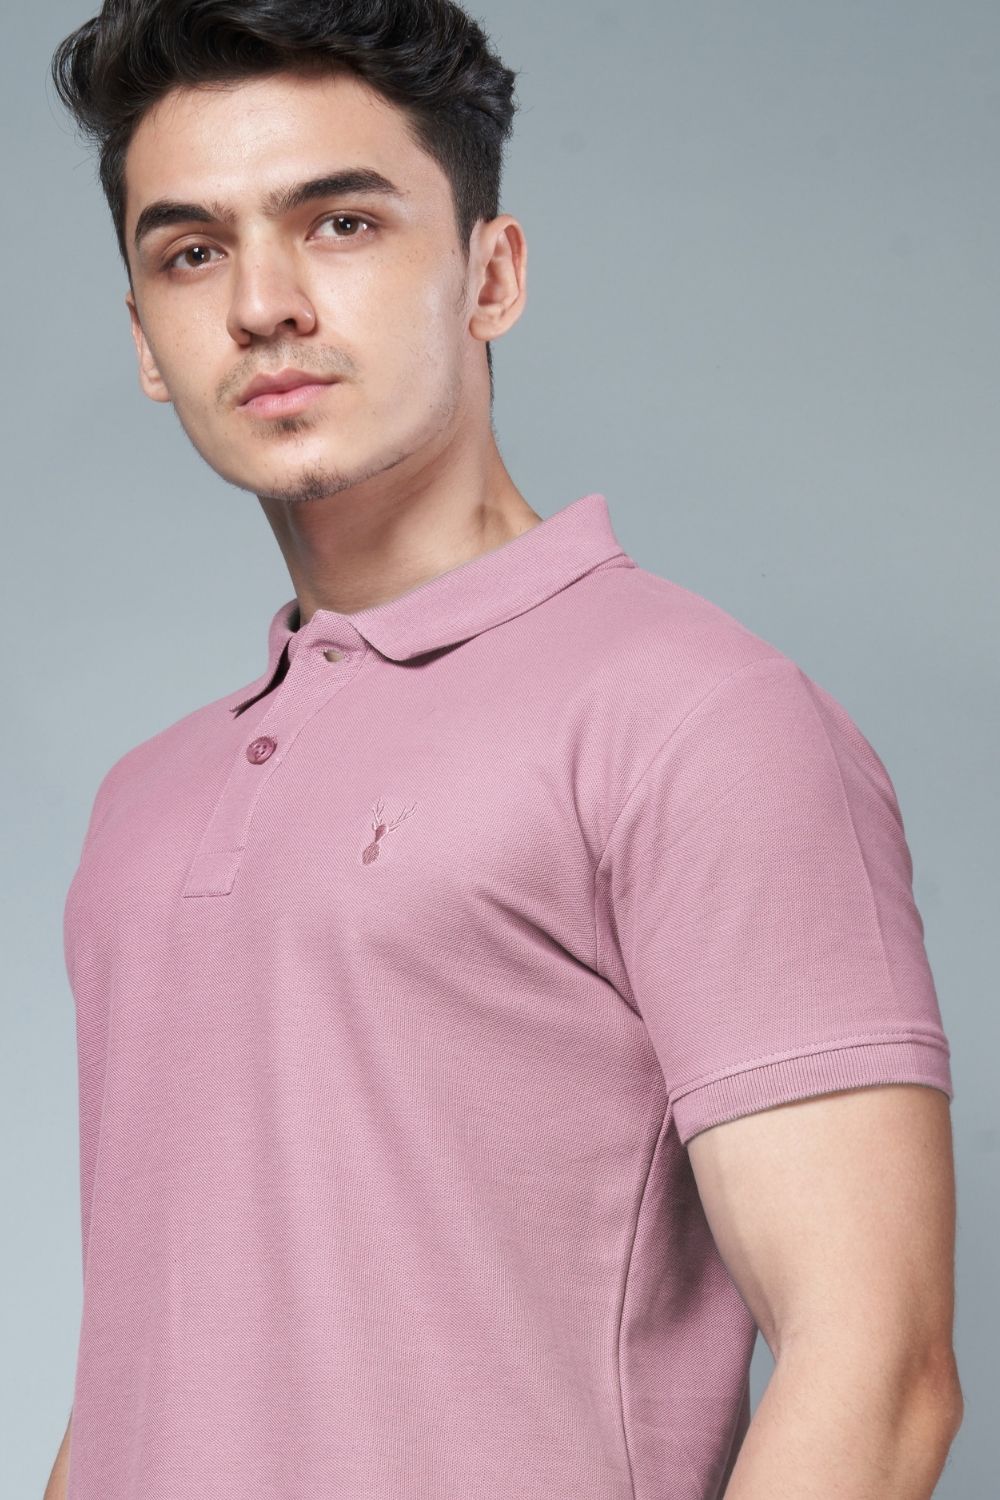 Salmon Pink colored, identity Polo T-shirts for men with collar and half sleeves.